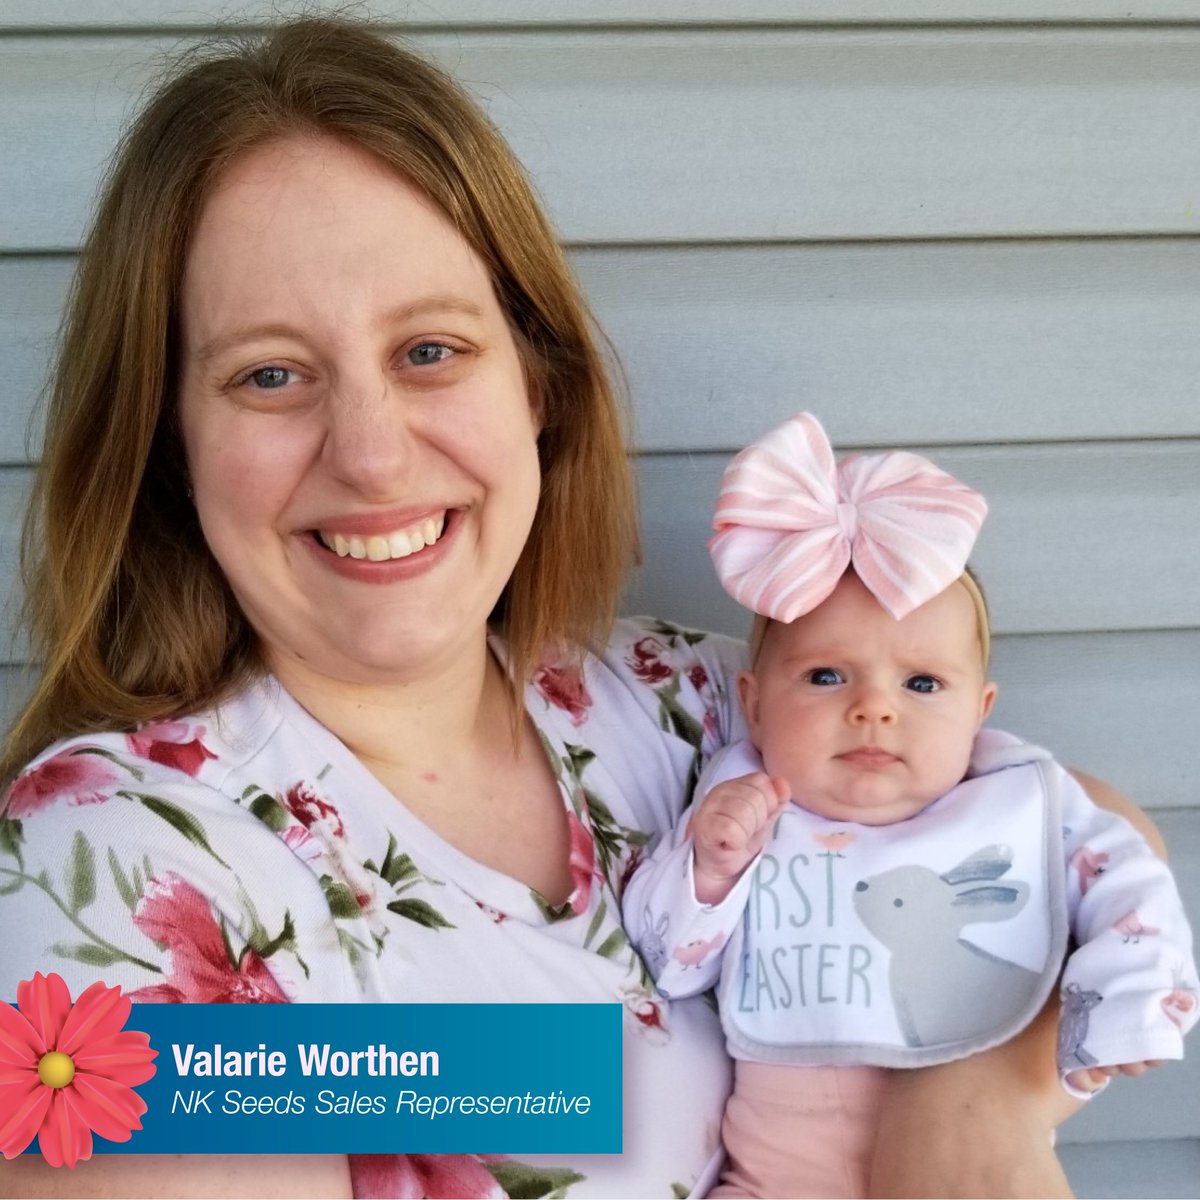 It's NK Sales Rep Valarie Worthen's first #MothersDay as a mom! She says that balancing her work in ag and life as a mom can be challenging, but there’s nothing more rewarding. We appreciate all she does for us and her baby Adaline! 💚
syngenta-us.com/seeds/nk/blog/…